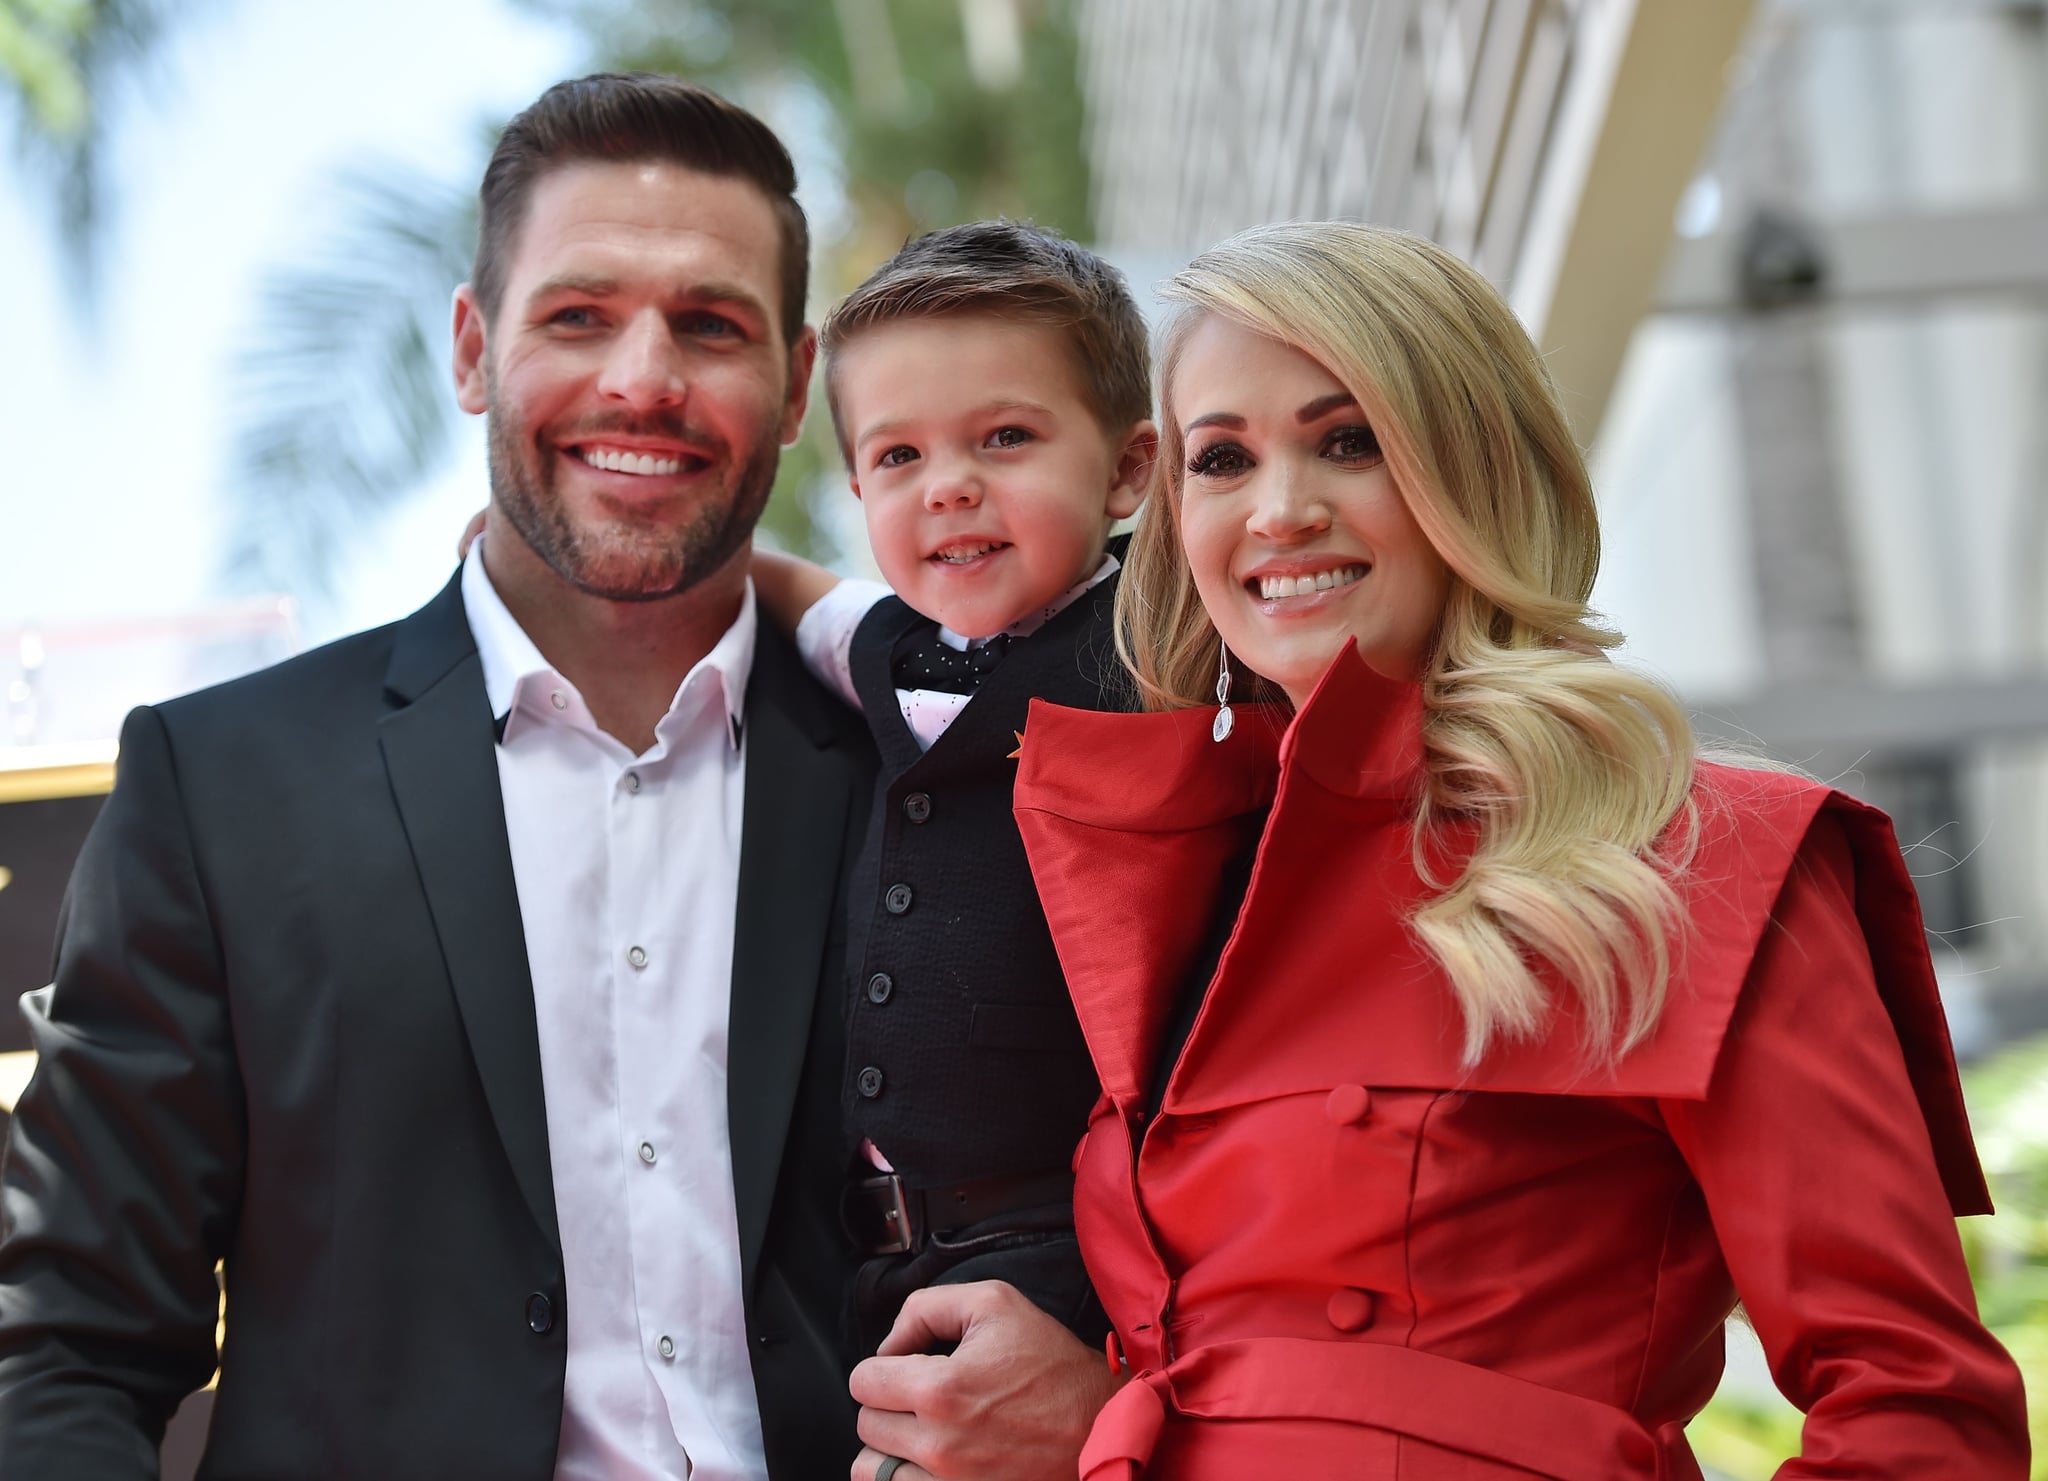 Singer Carrie Underwood poses with her husband Mike Fisher and their 3-year-old son Isaiah Michael at her star unveiling ceremony on the Hollywood Walk of Fame, September 20, 2018 in Hollywood, California. (Photo by Robyn BECK / AFP)        (Photo credit should read ROBYN BECK/AFP/Getty Images)